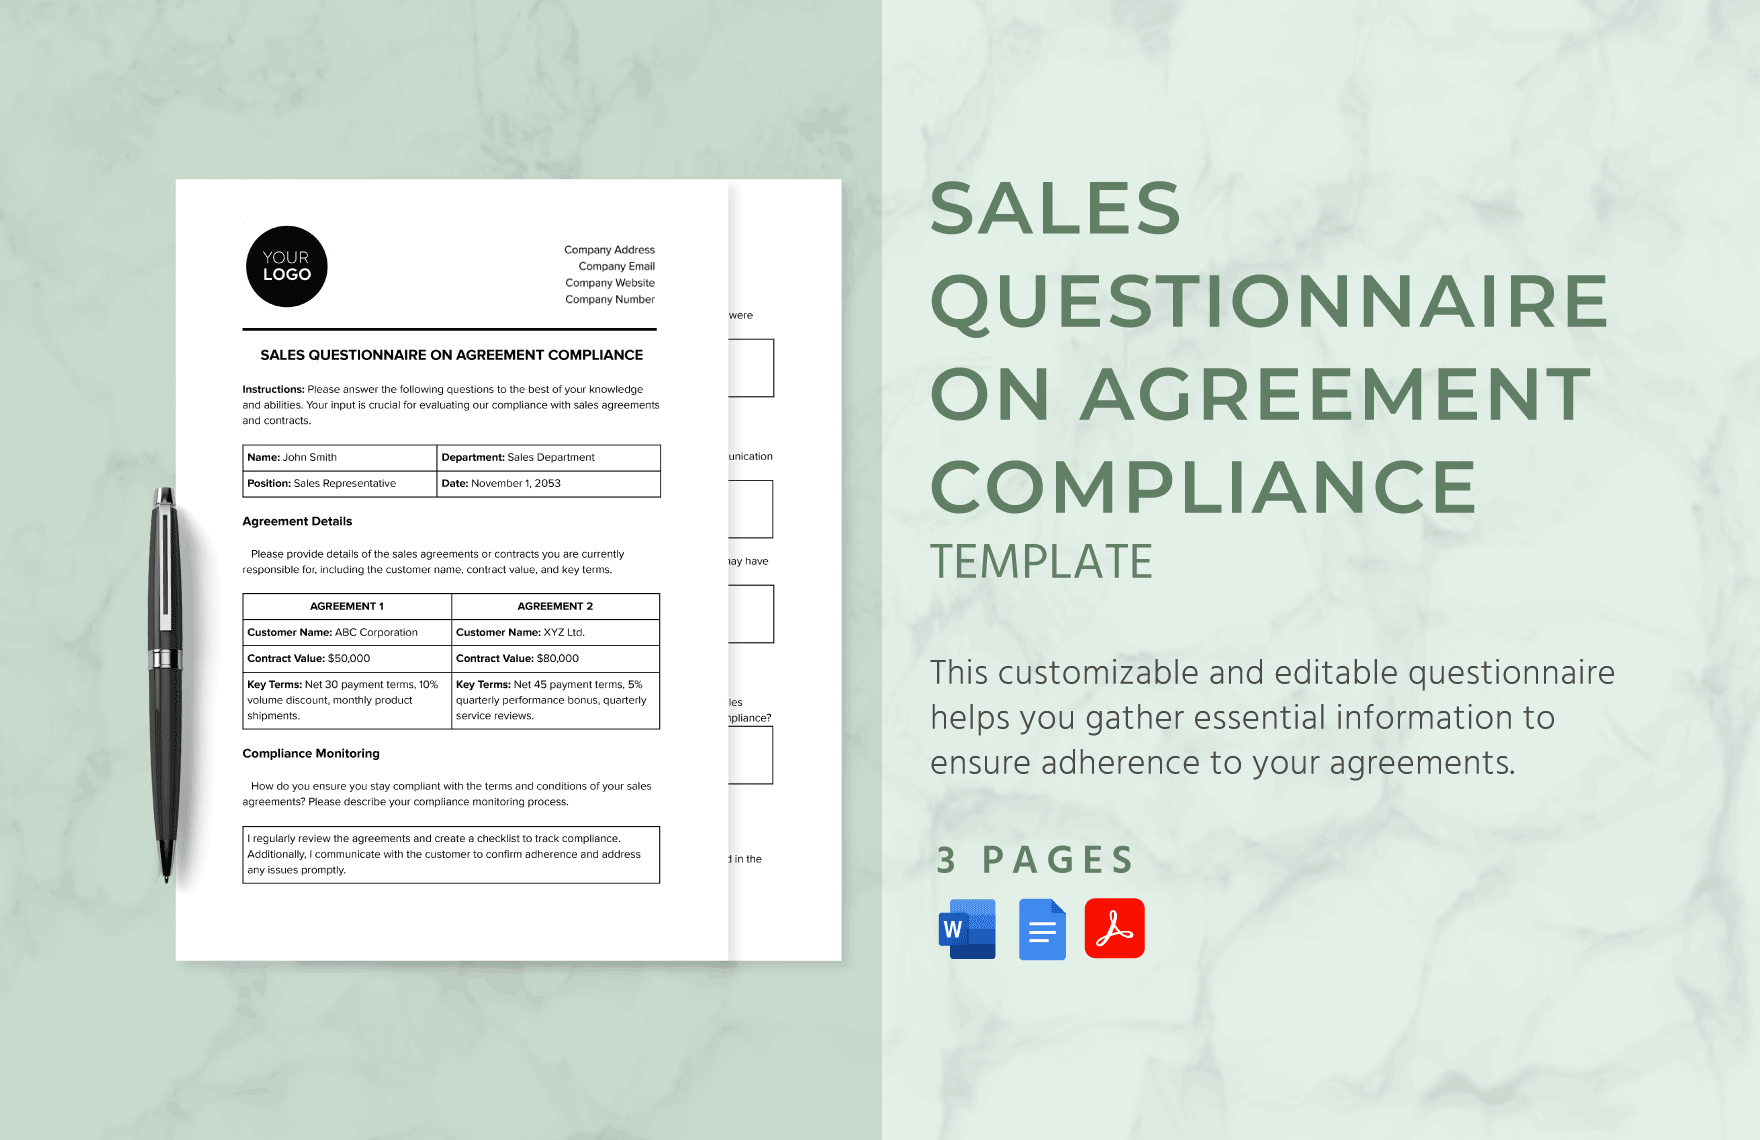 Sales Questionnaire on Agreement Compliance Template